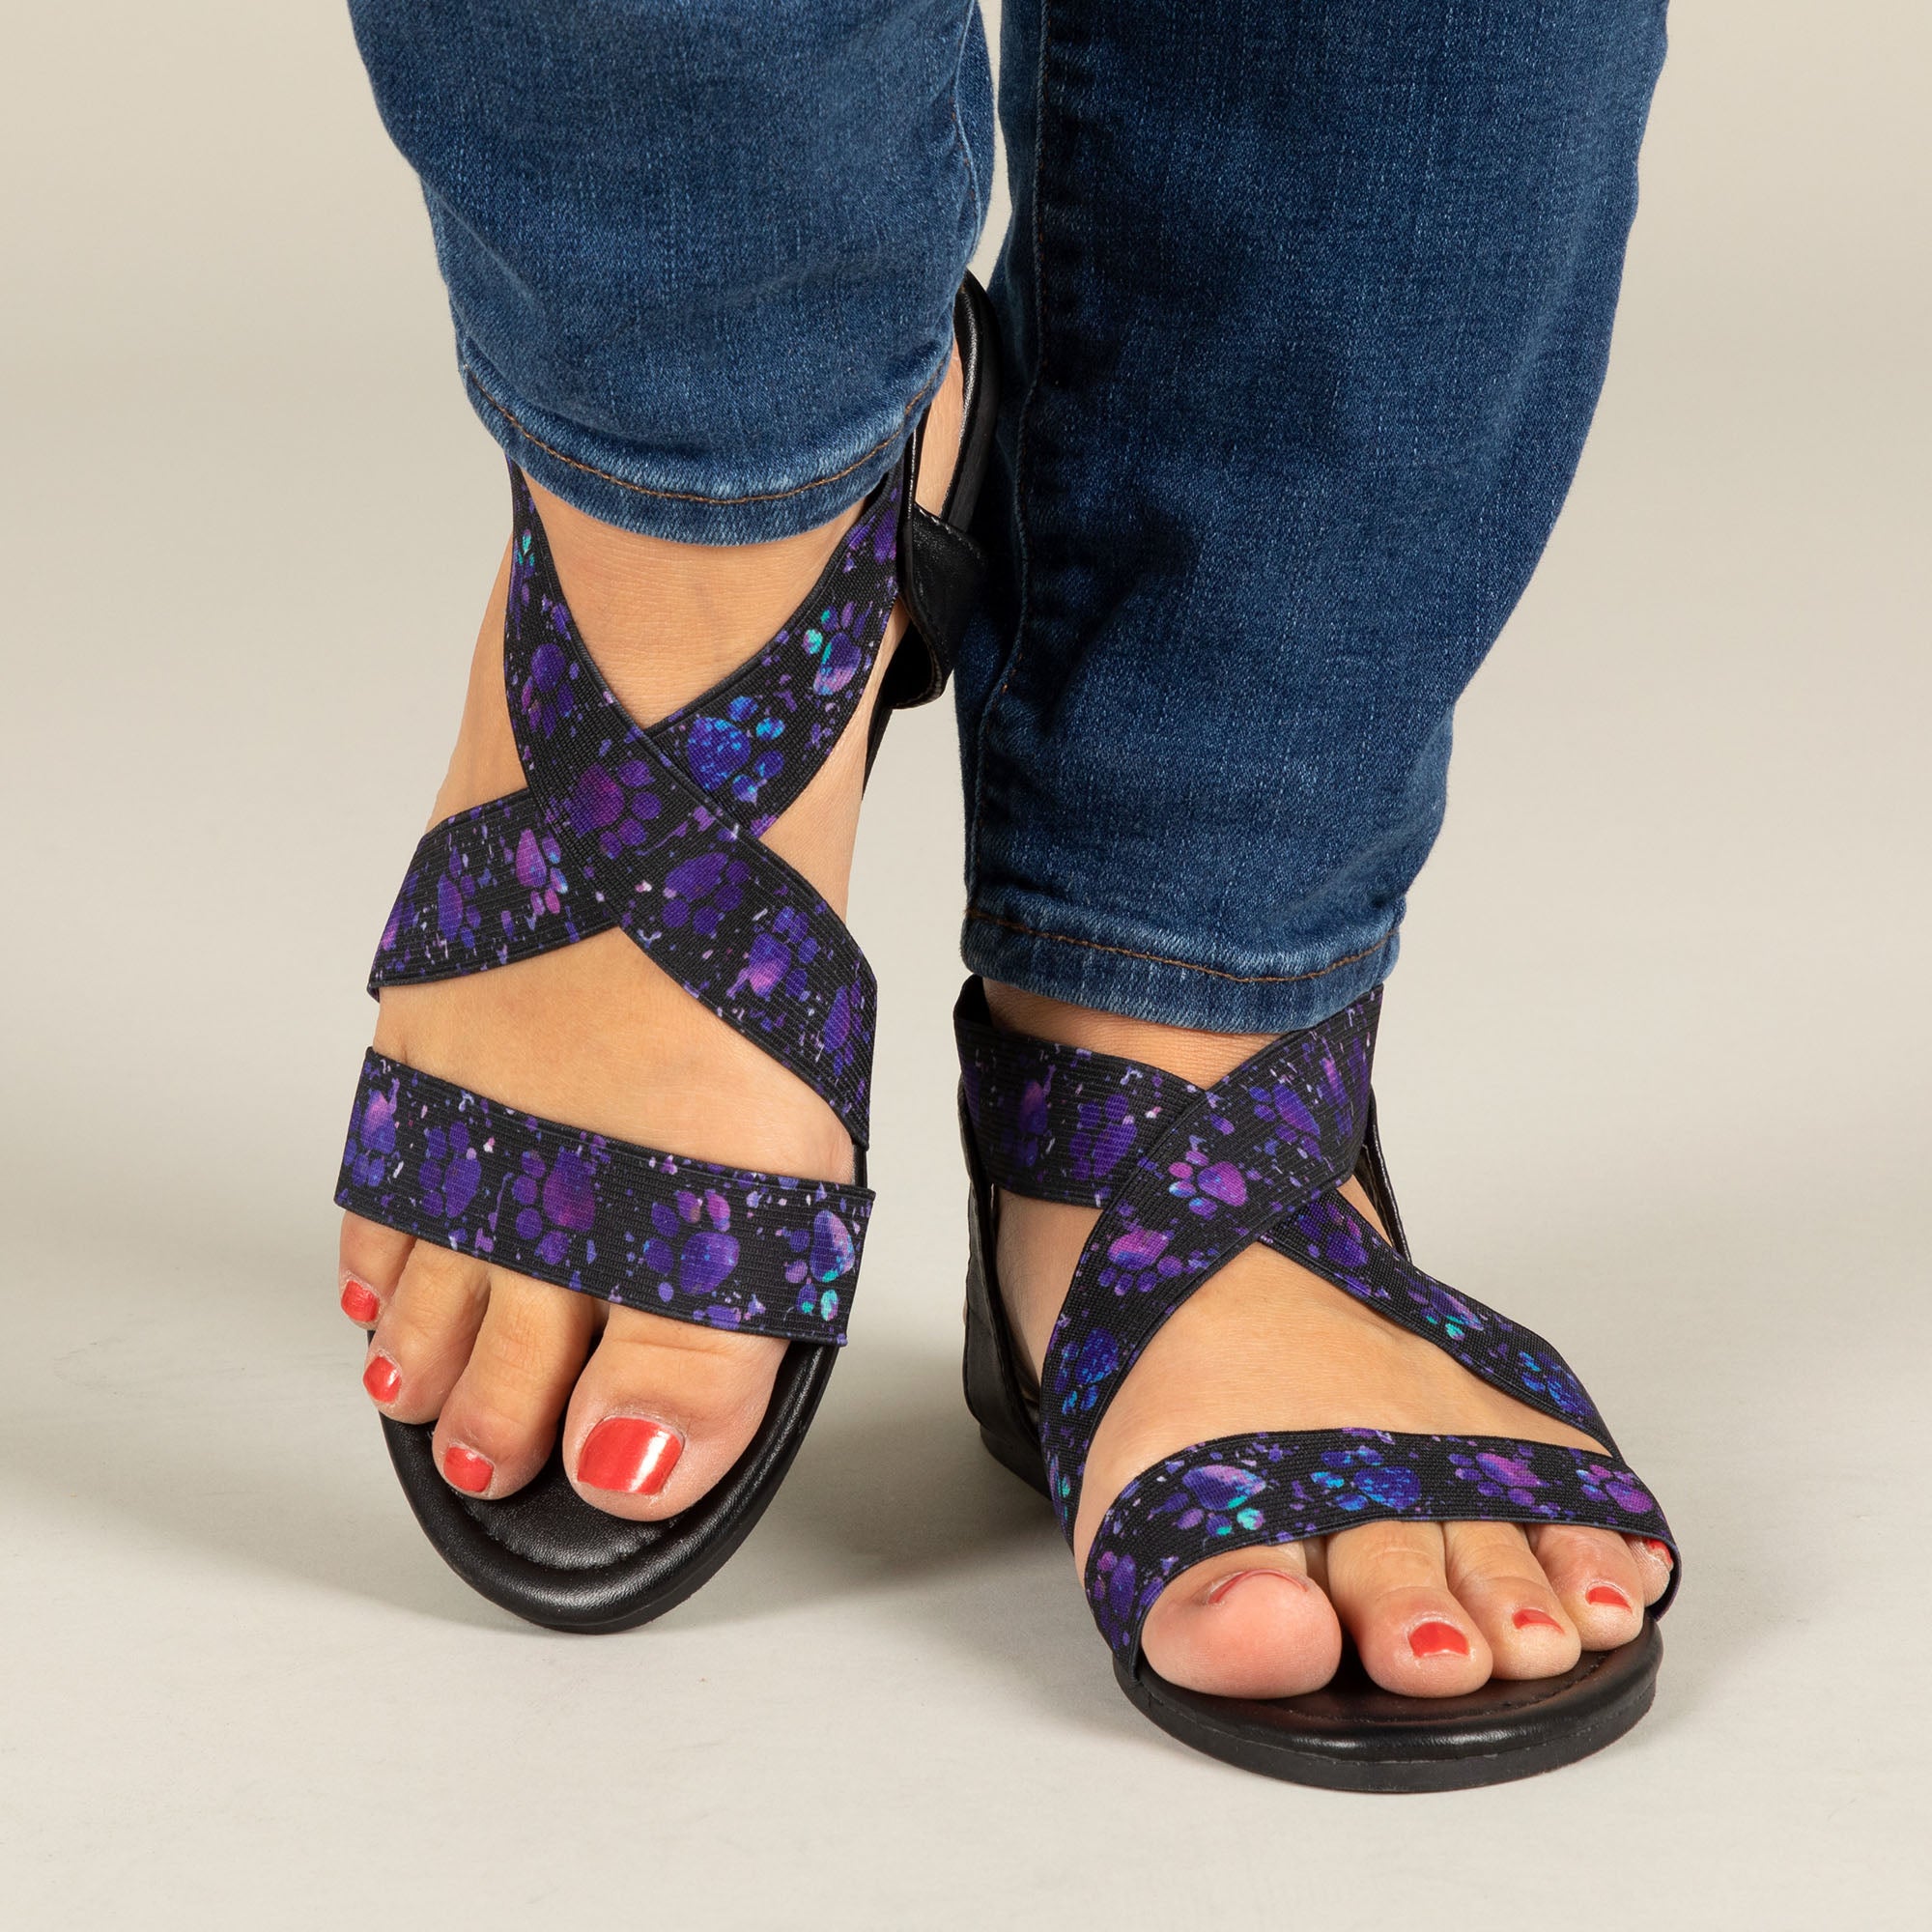 Pawsitively Stretchy Sandals - Painted Paws - 9